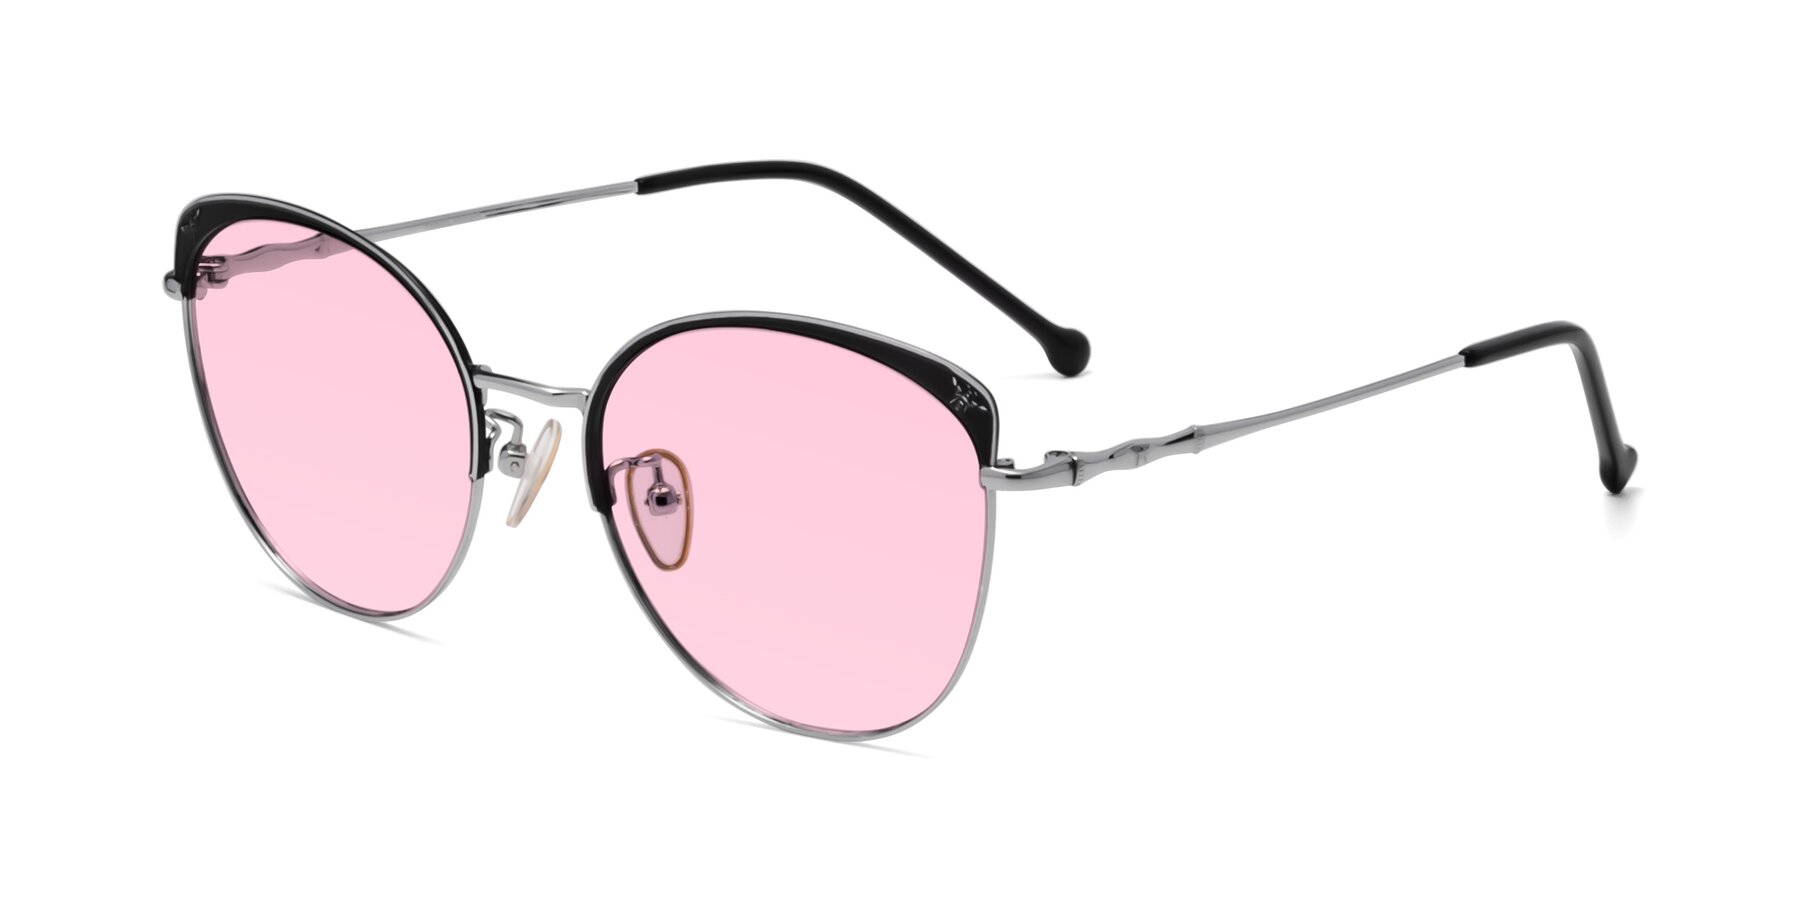 Angle of 18019 in Black-Silver with Light Pink Tinted Lenses